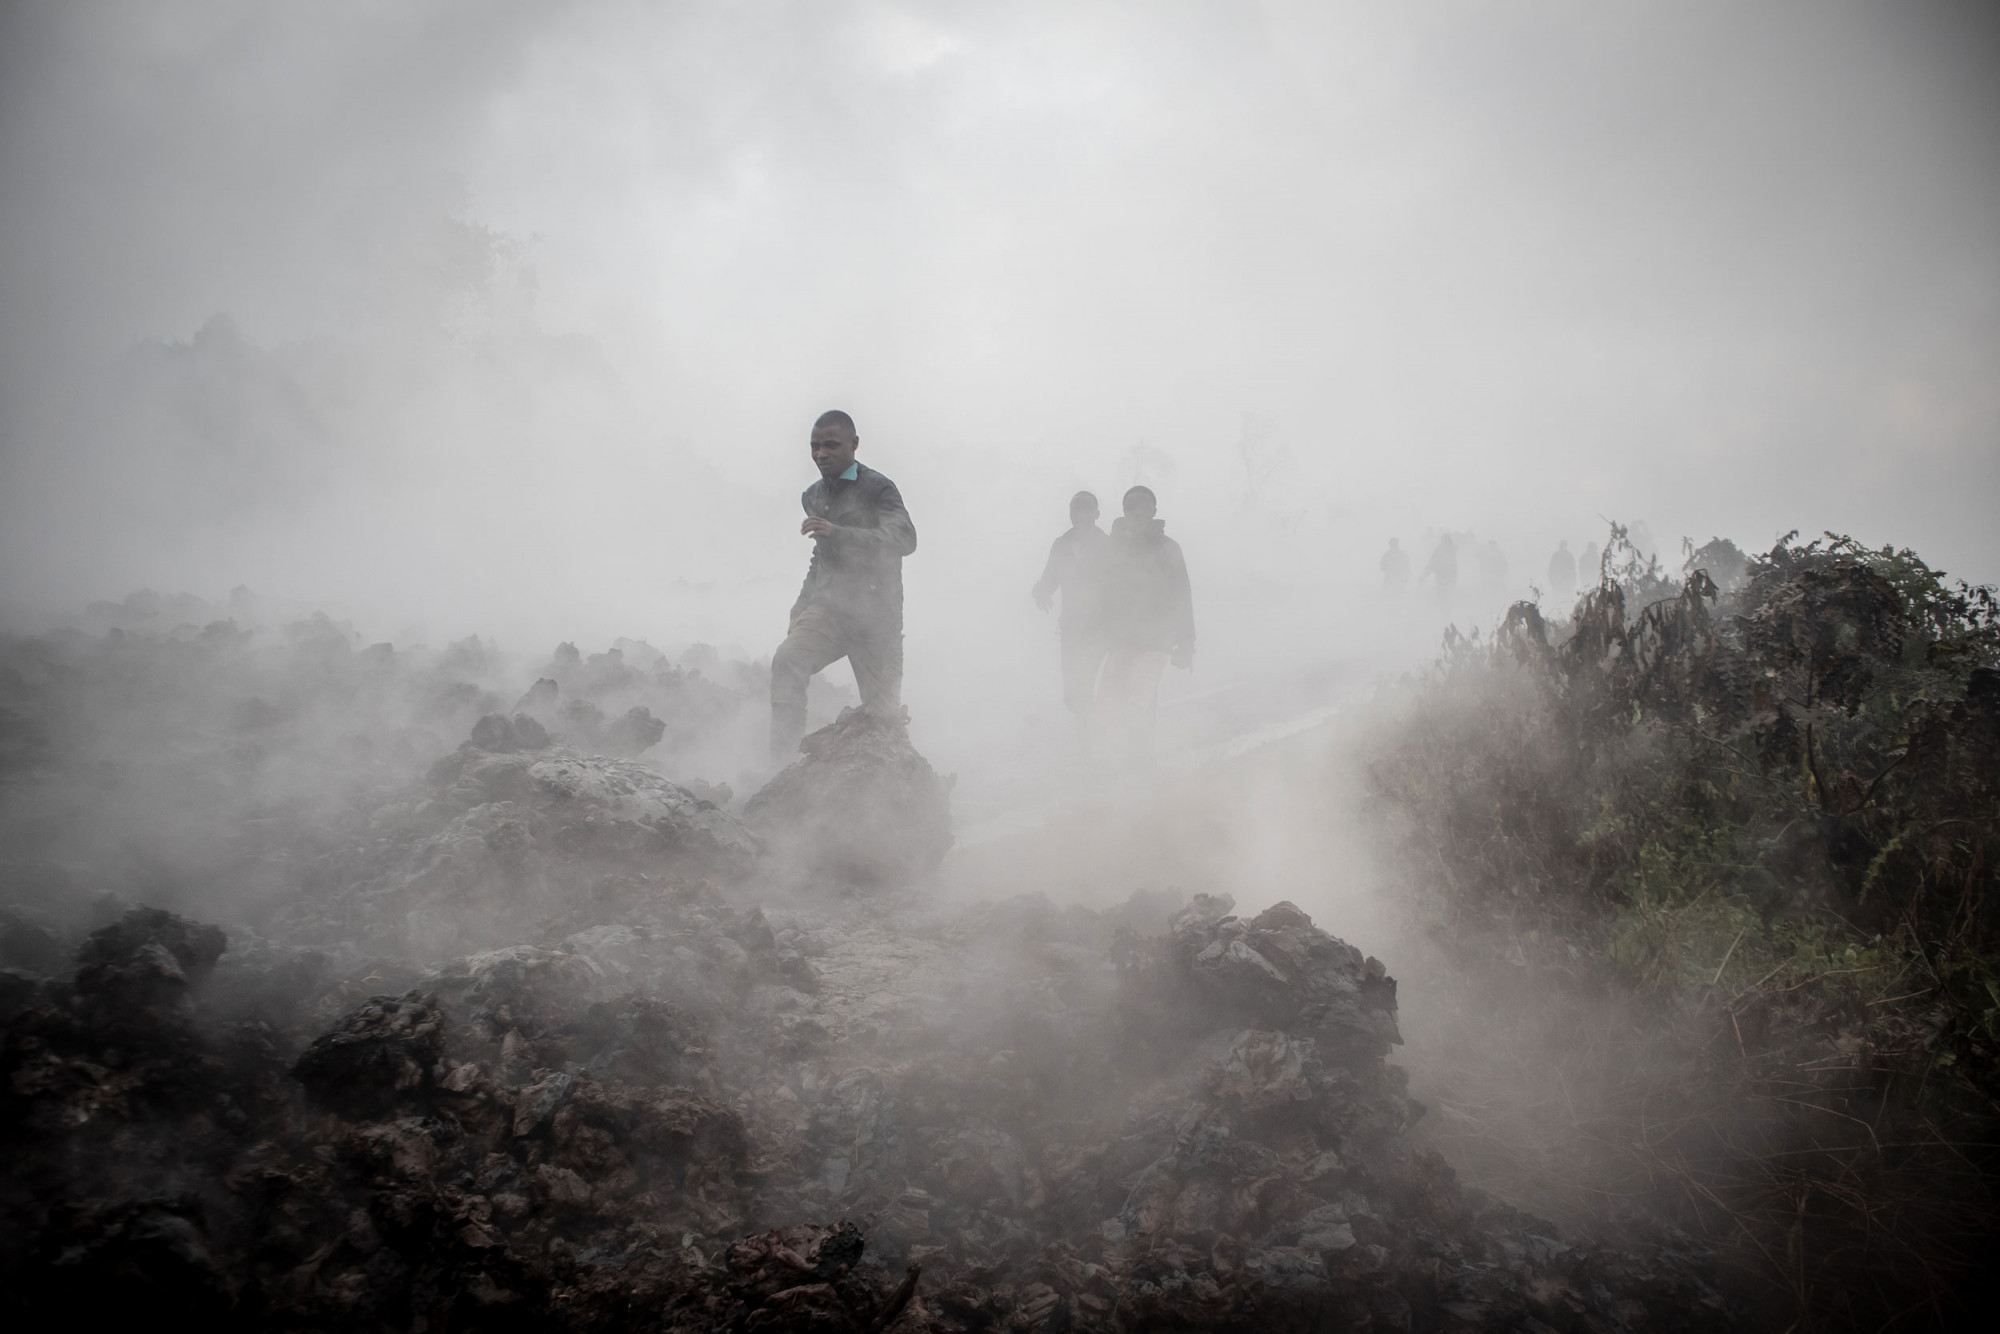 North Kivu, 23 May 2021. On the morning after the eruption Congo in Conversation photographer Guerchom Ndebo continued to file photographs for Agence France-Press, including this image of people crossing lava still smouldering and releasing noxious gases as it cools. 